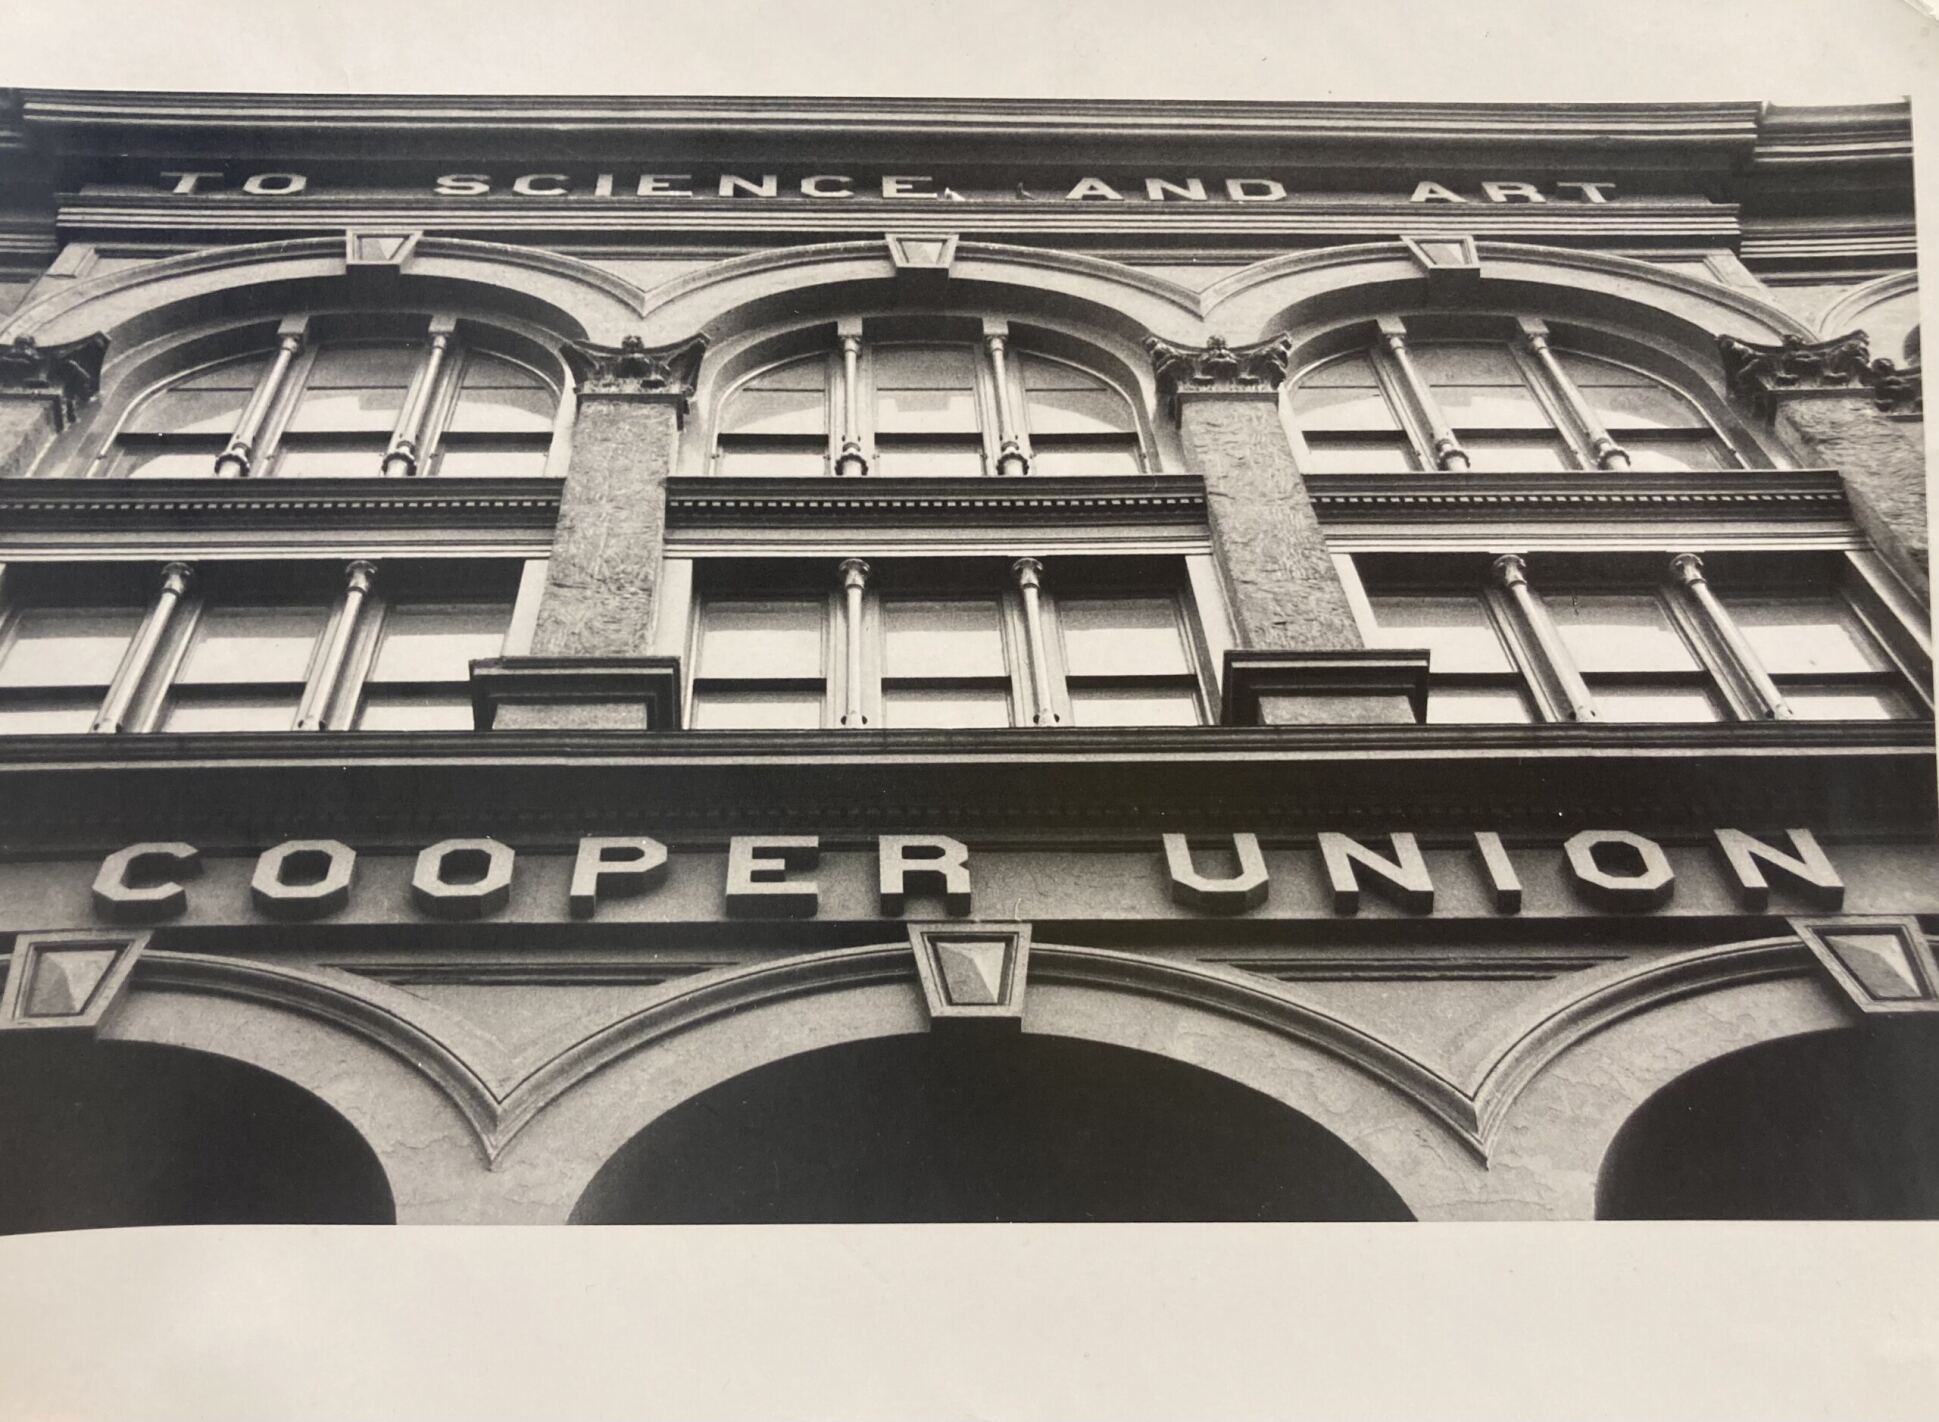 Foundation Building, undated; Photo Courtesy of the Cooper Union Archives, Photograph collection.